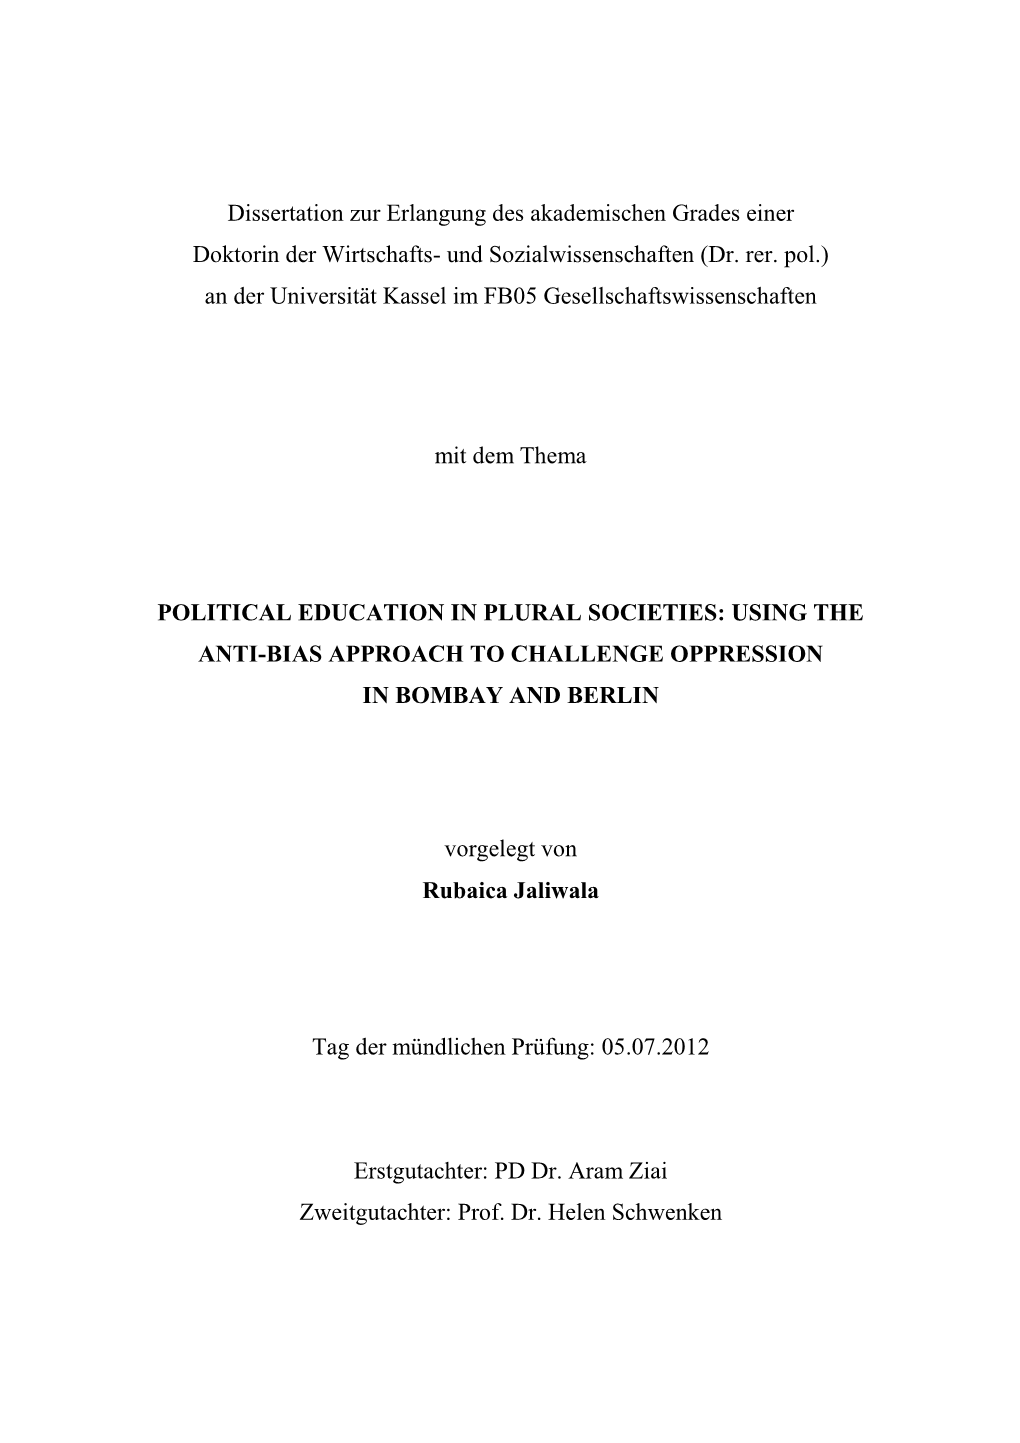 Political Education in Plural Societies: Using the Anti-Bias Approach to Challenge Oppression in Bombay and Berlin